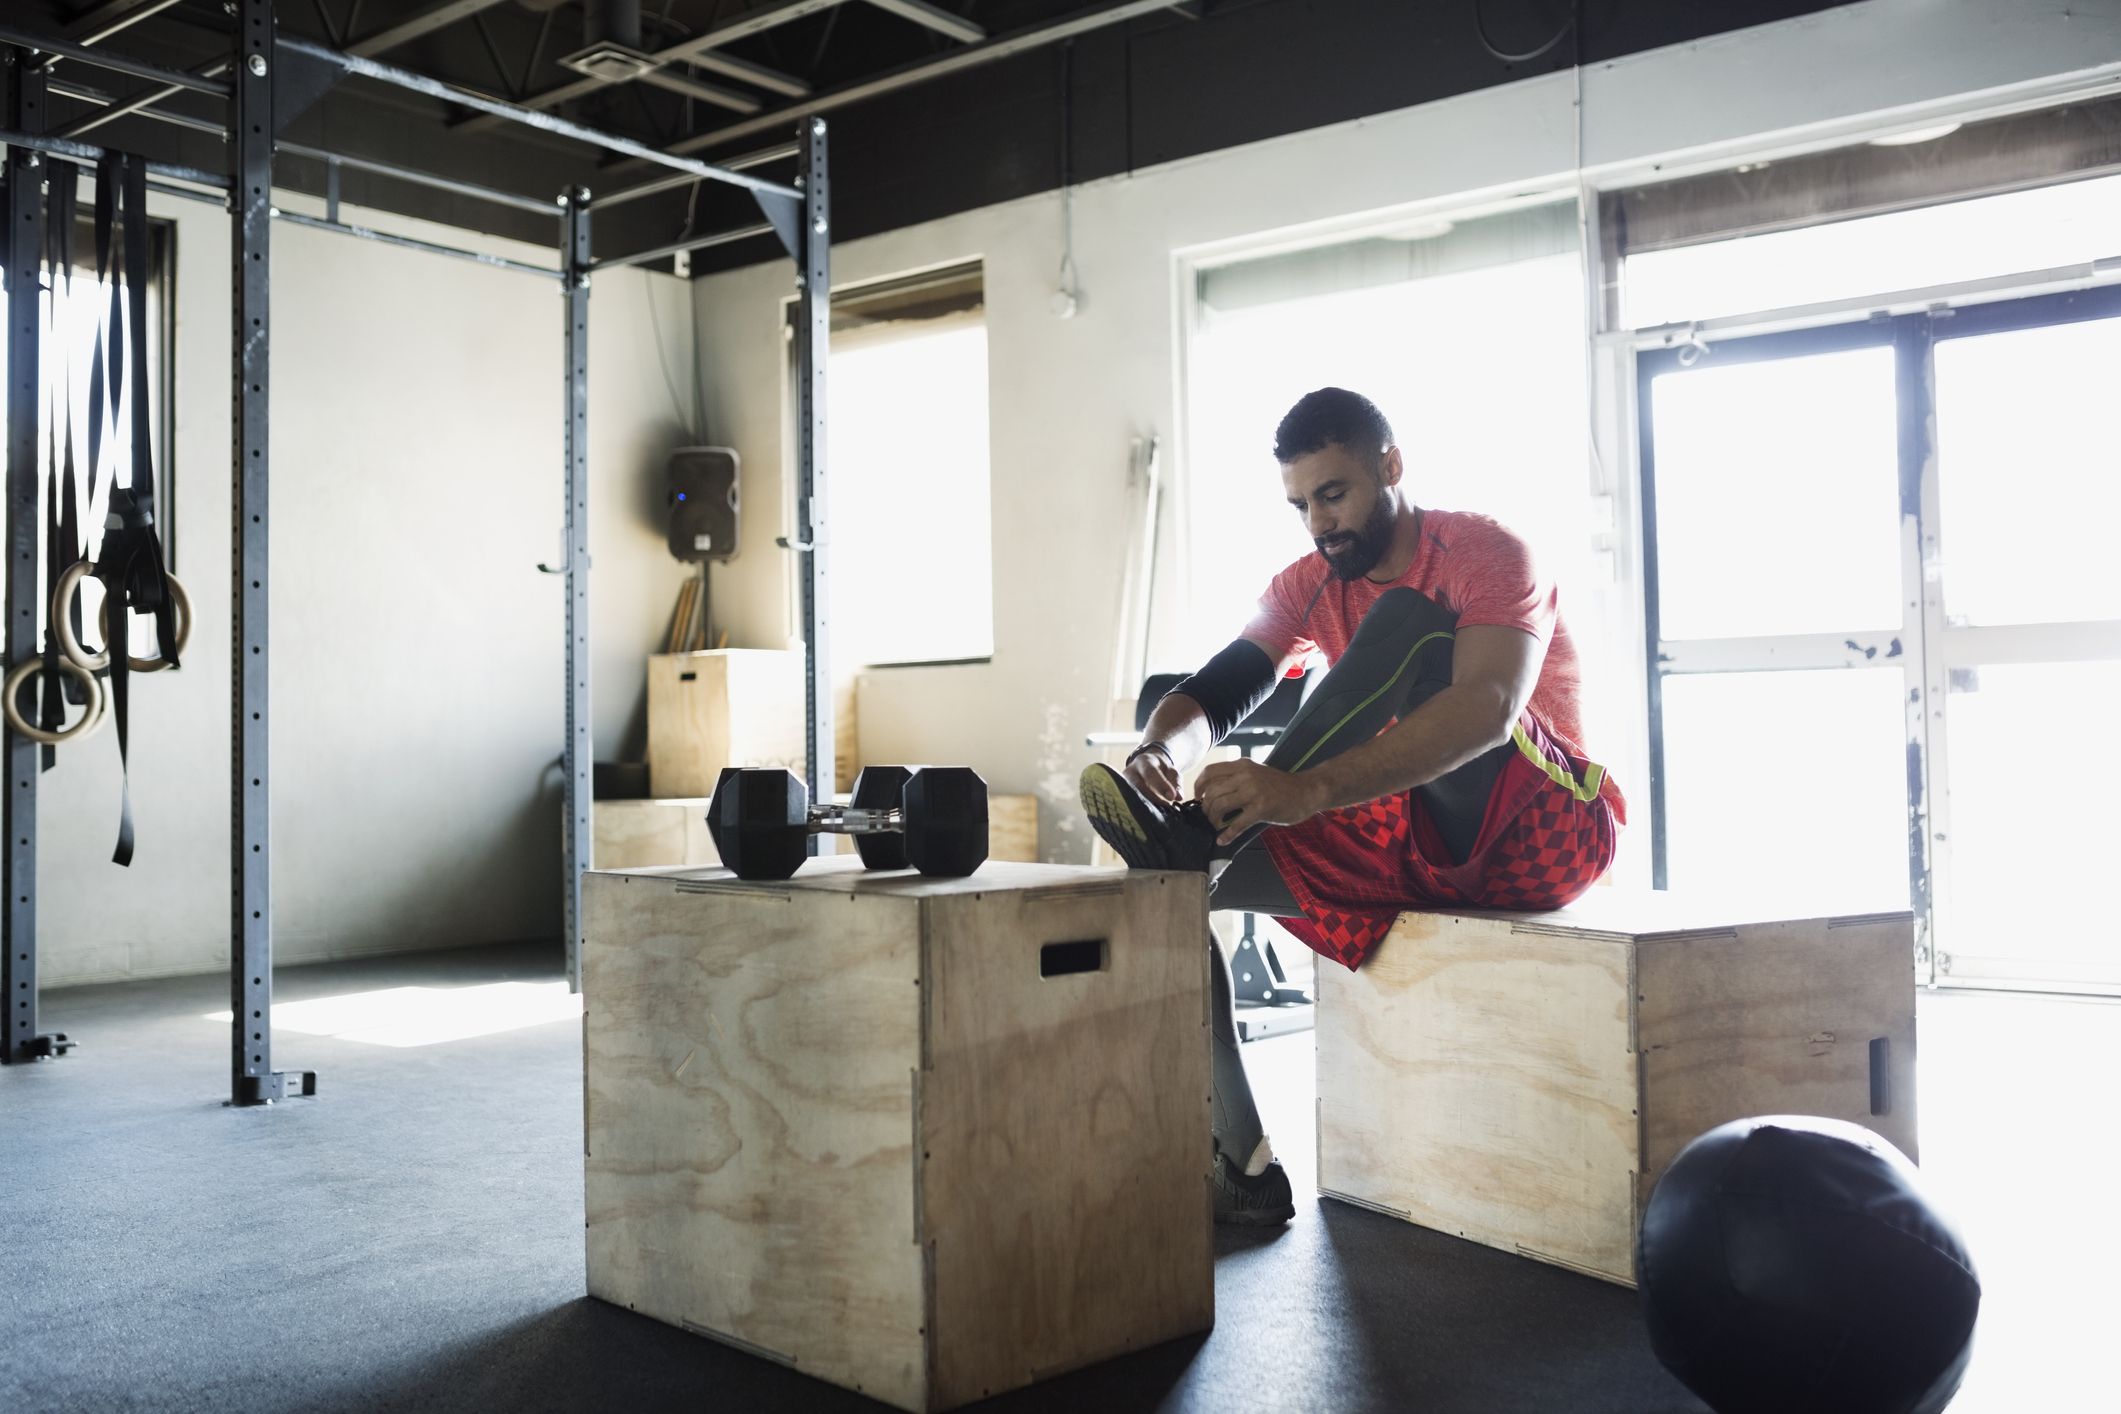 best runners for crossfit